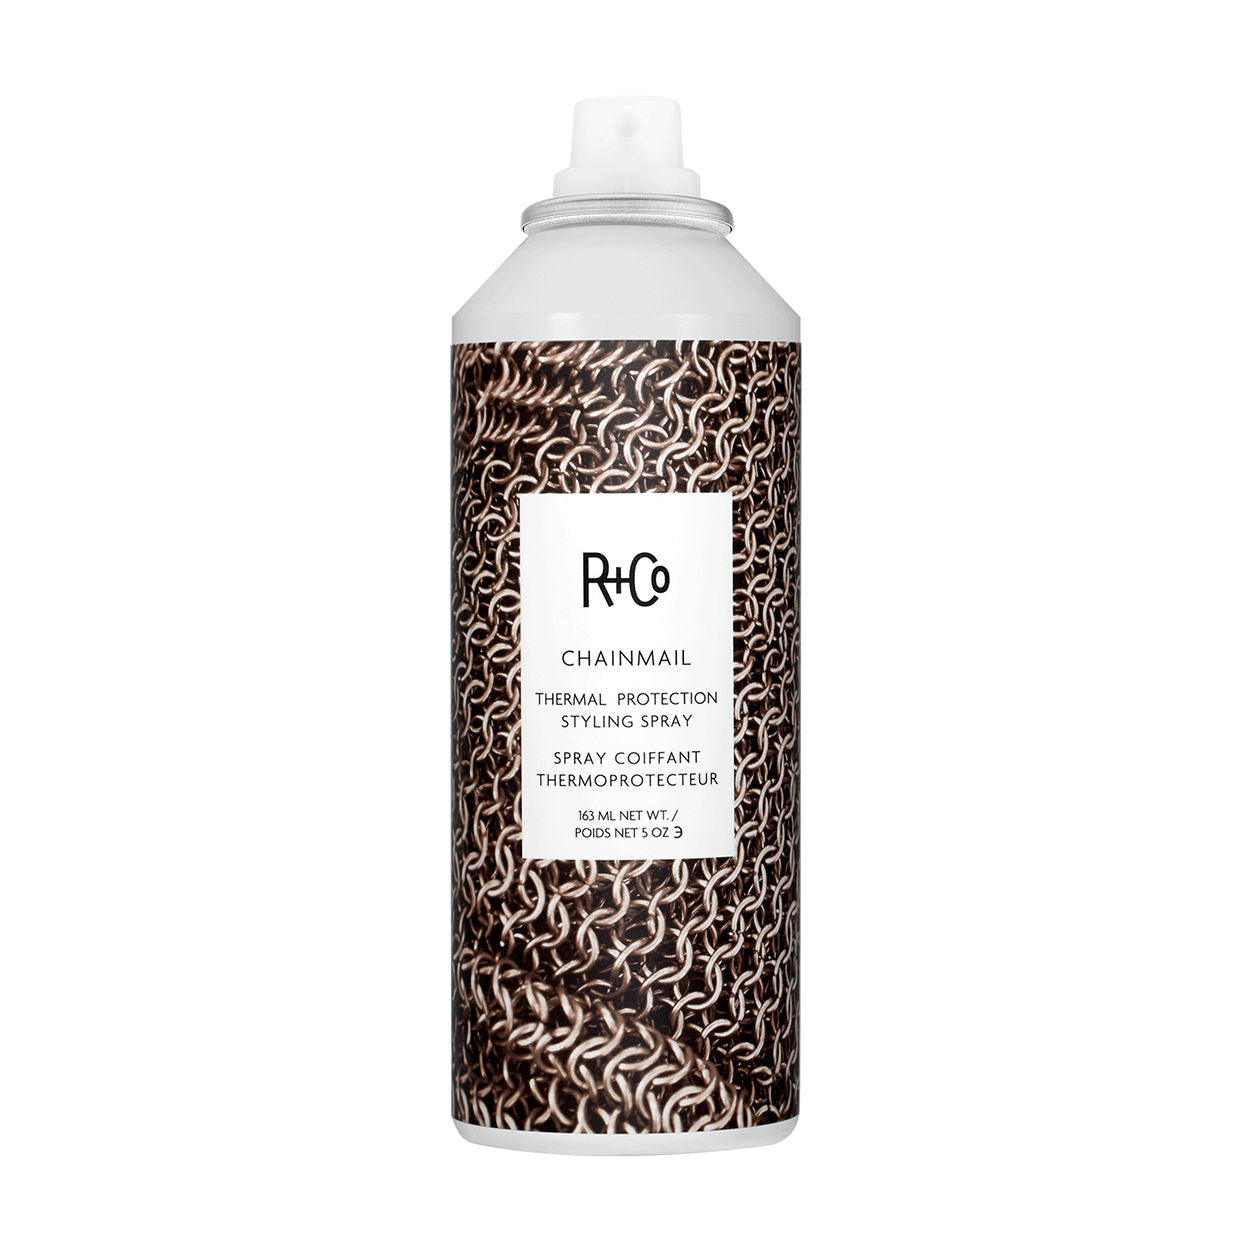 R+Co Chainmail Thermal Protection Styling Spray main image